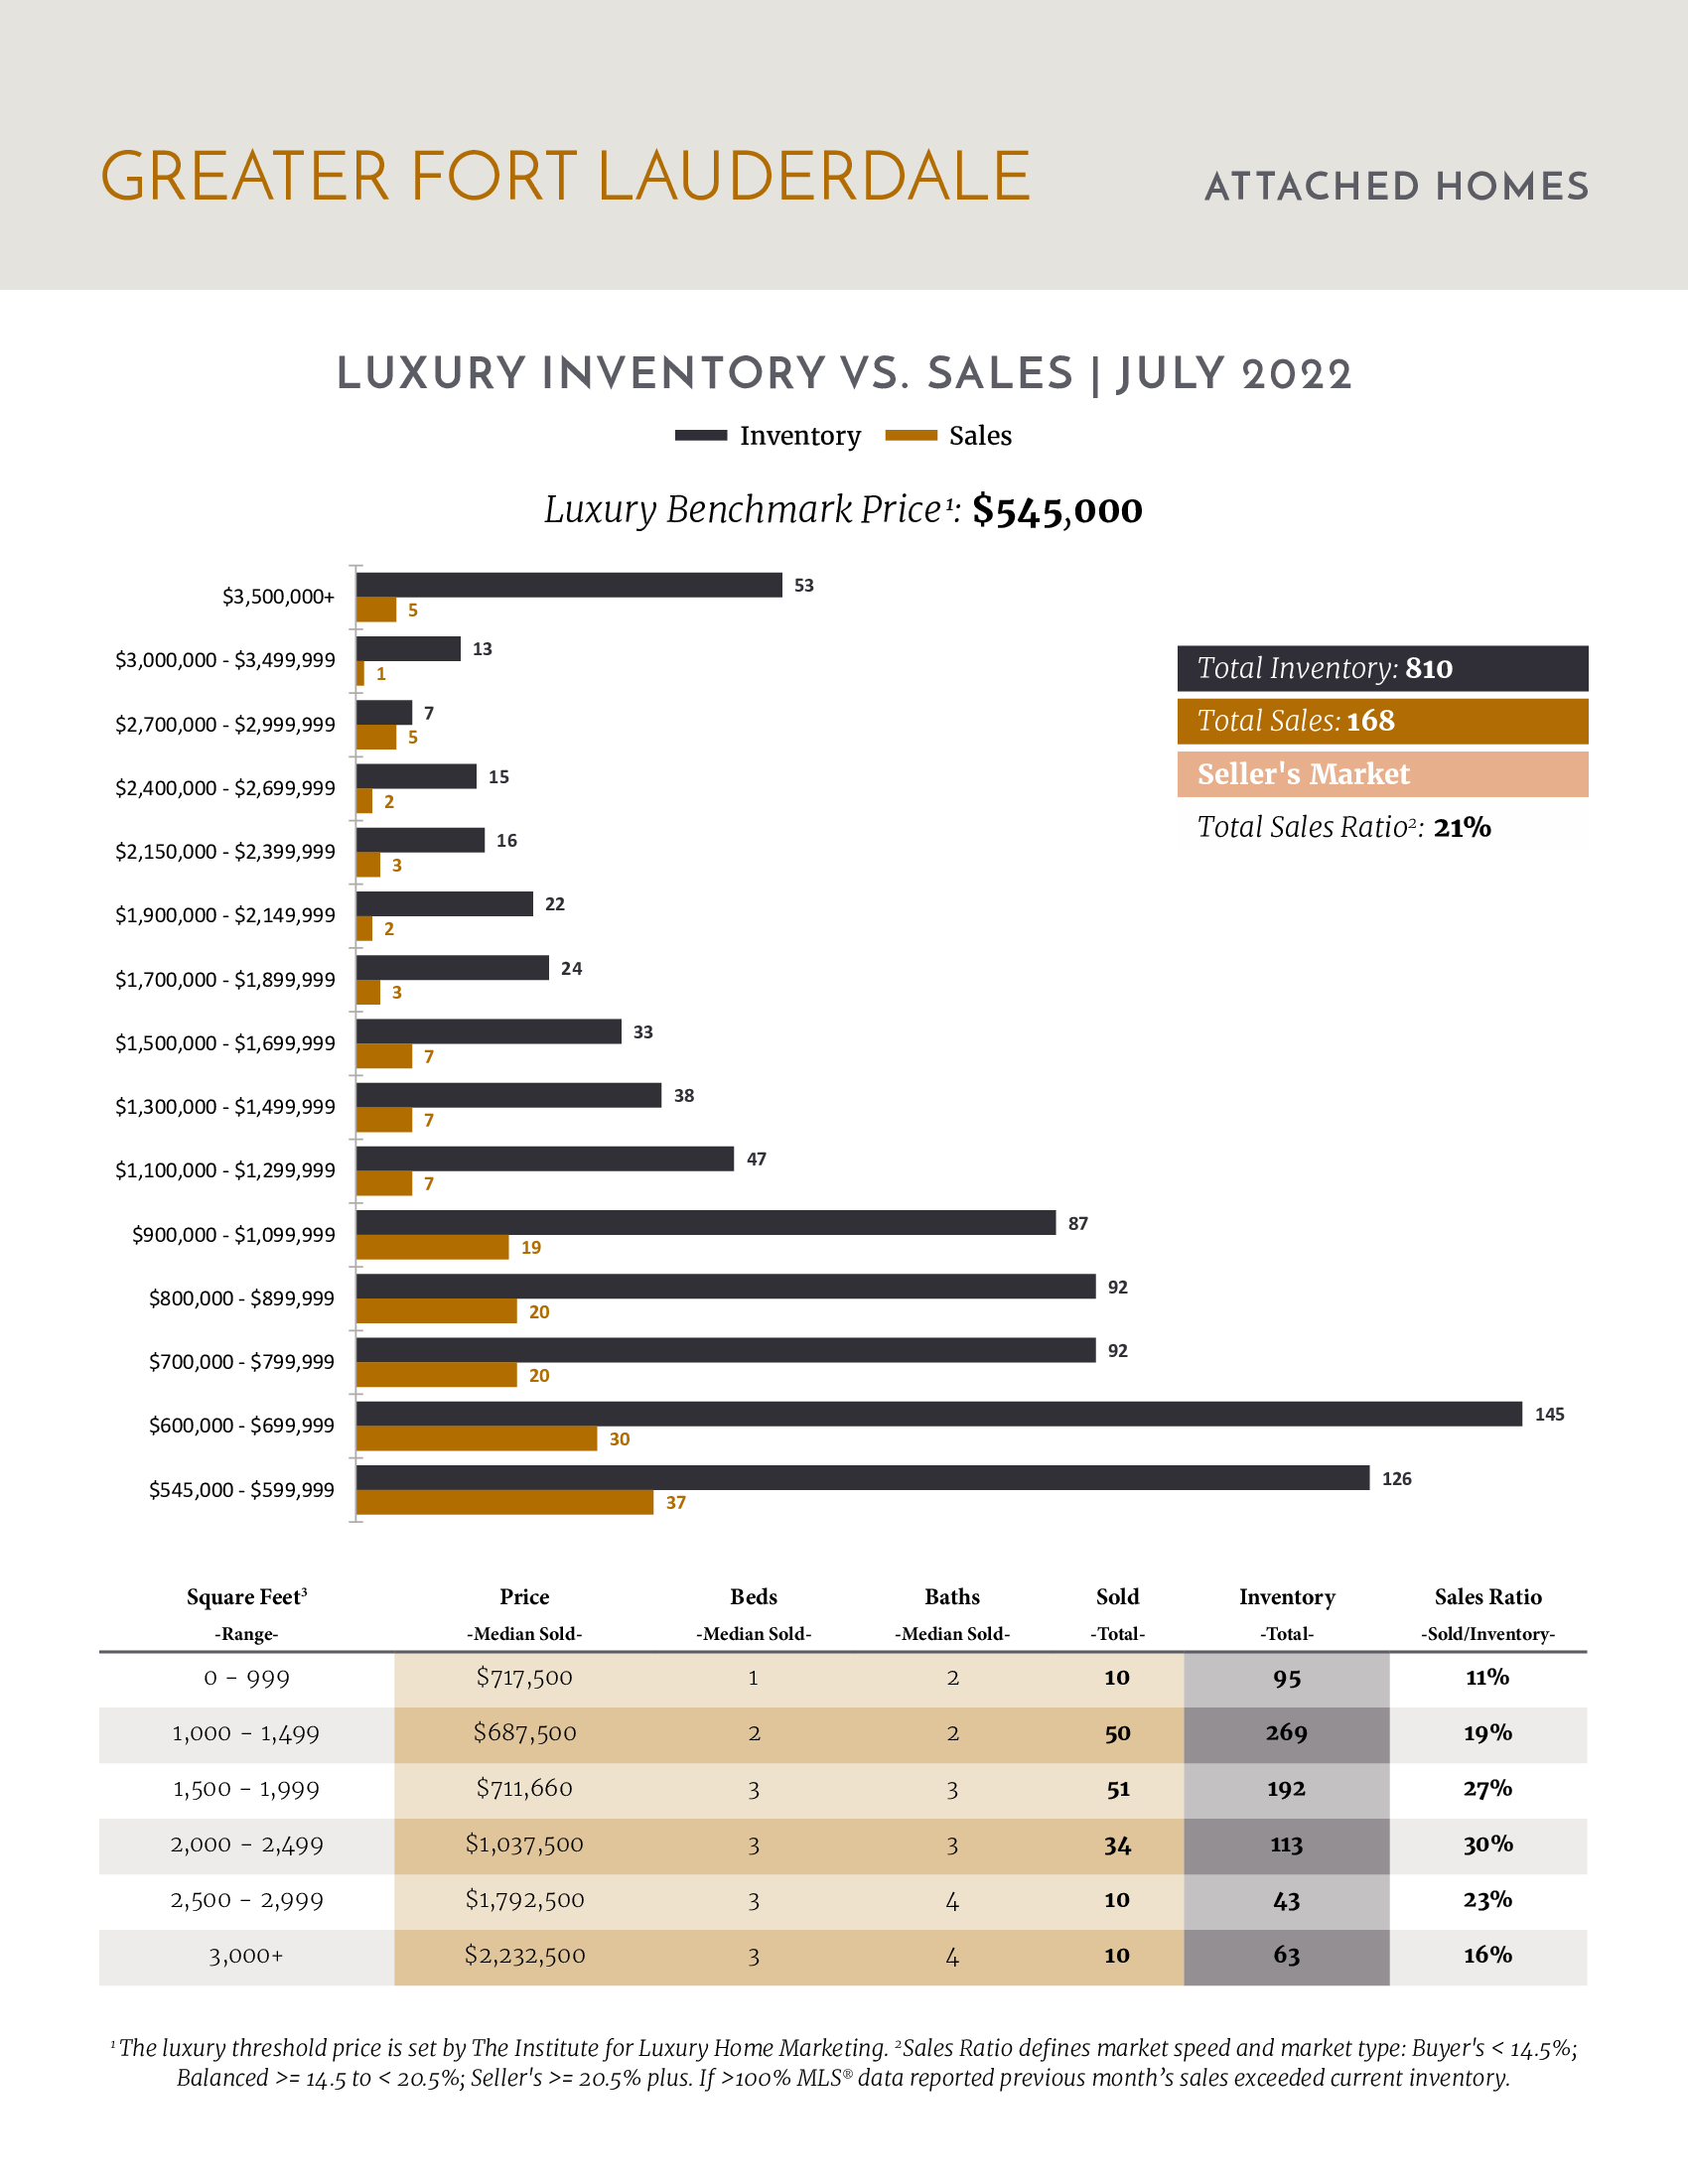 August 2022 Single Family Luxury Home Market Trend 